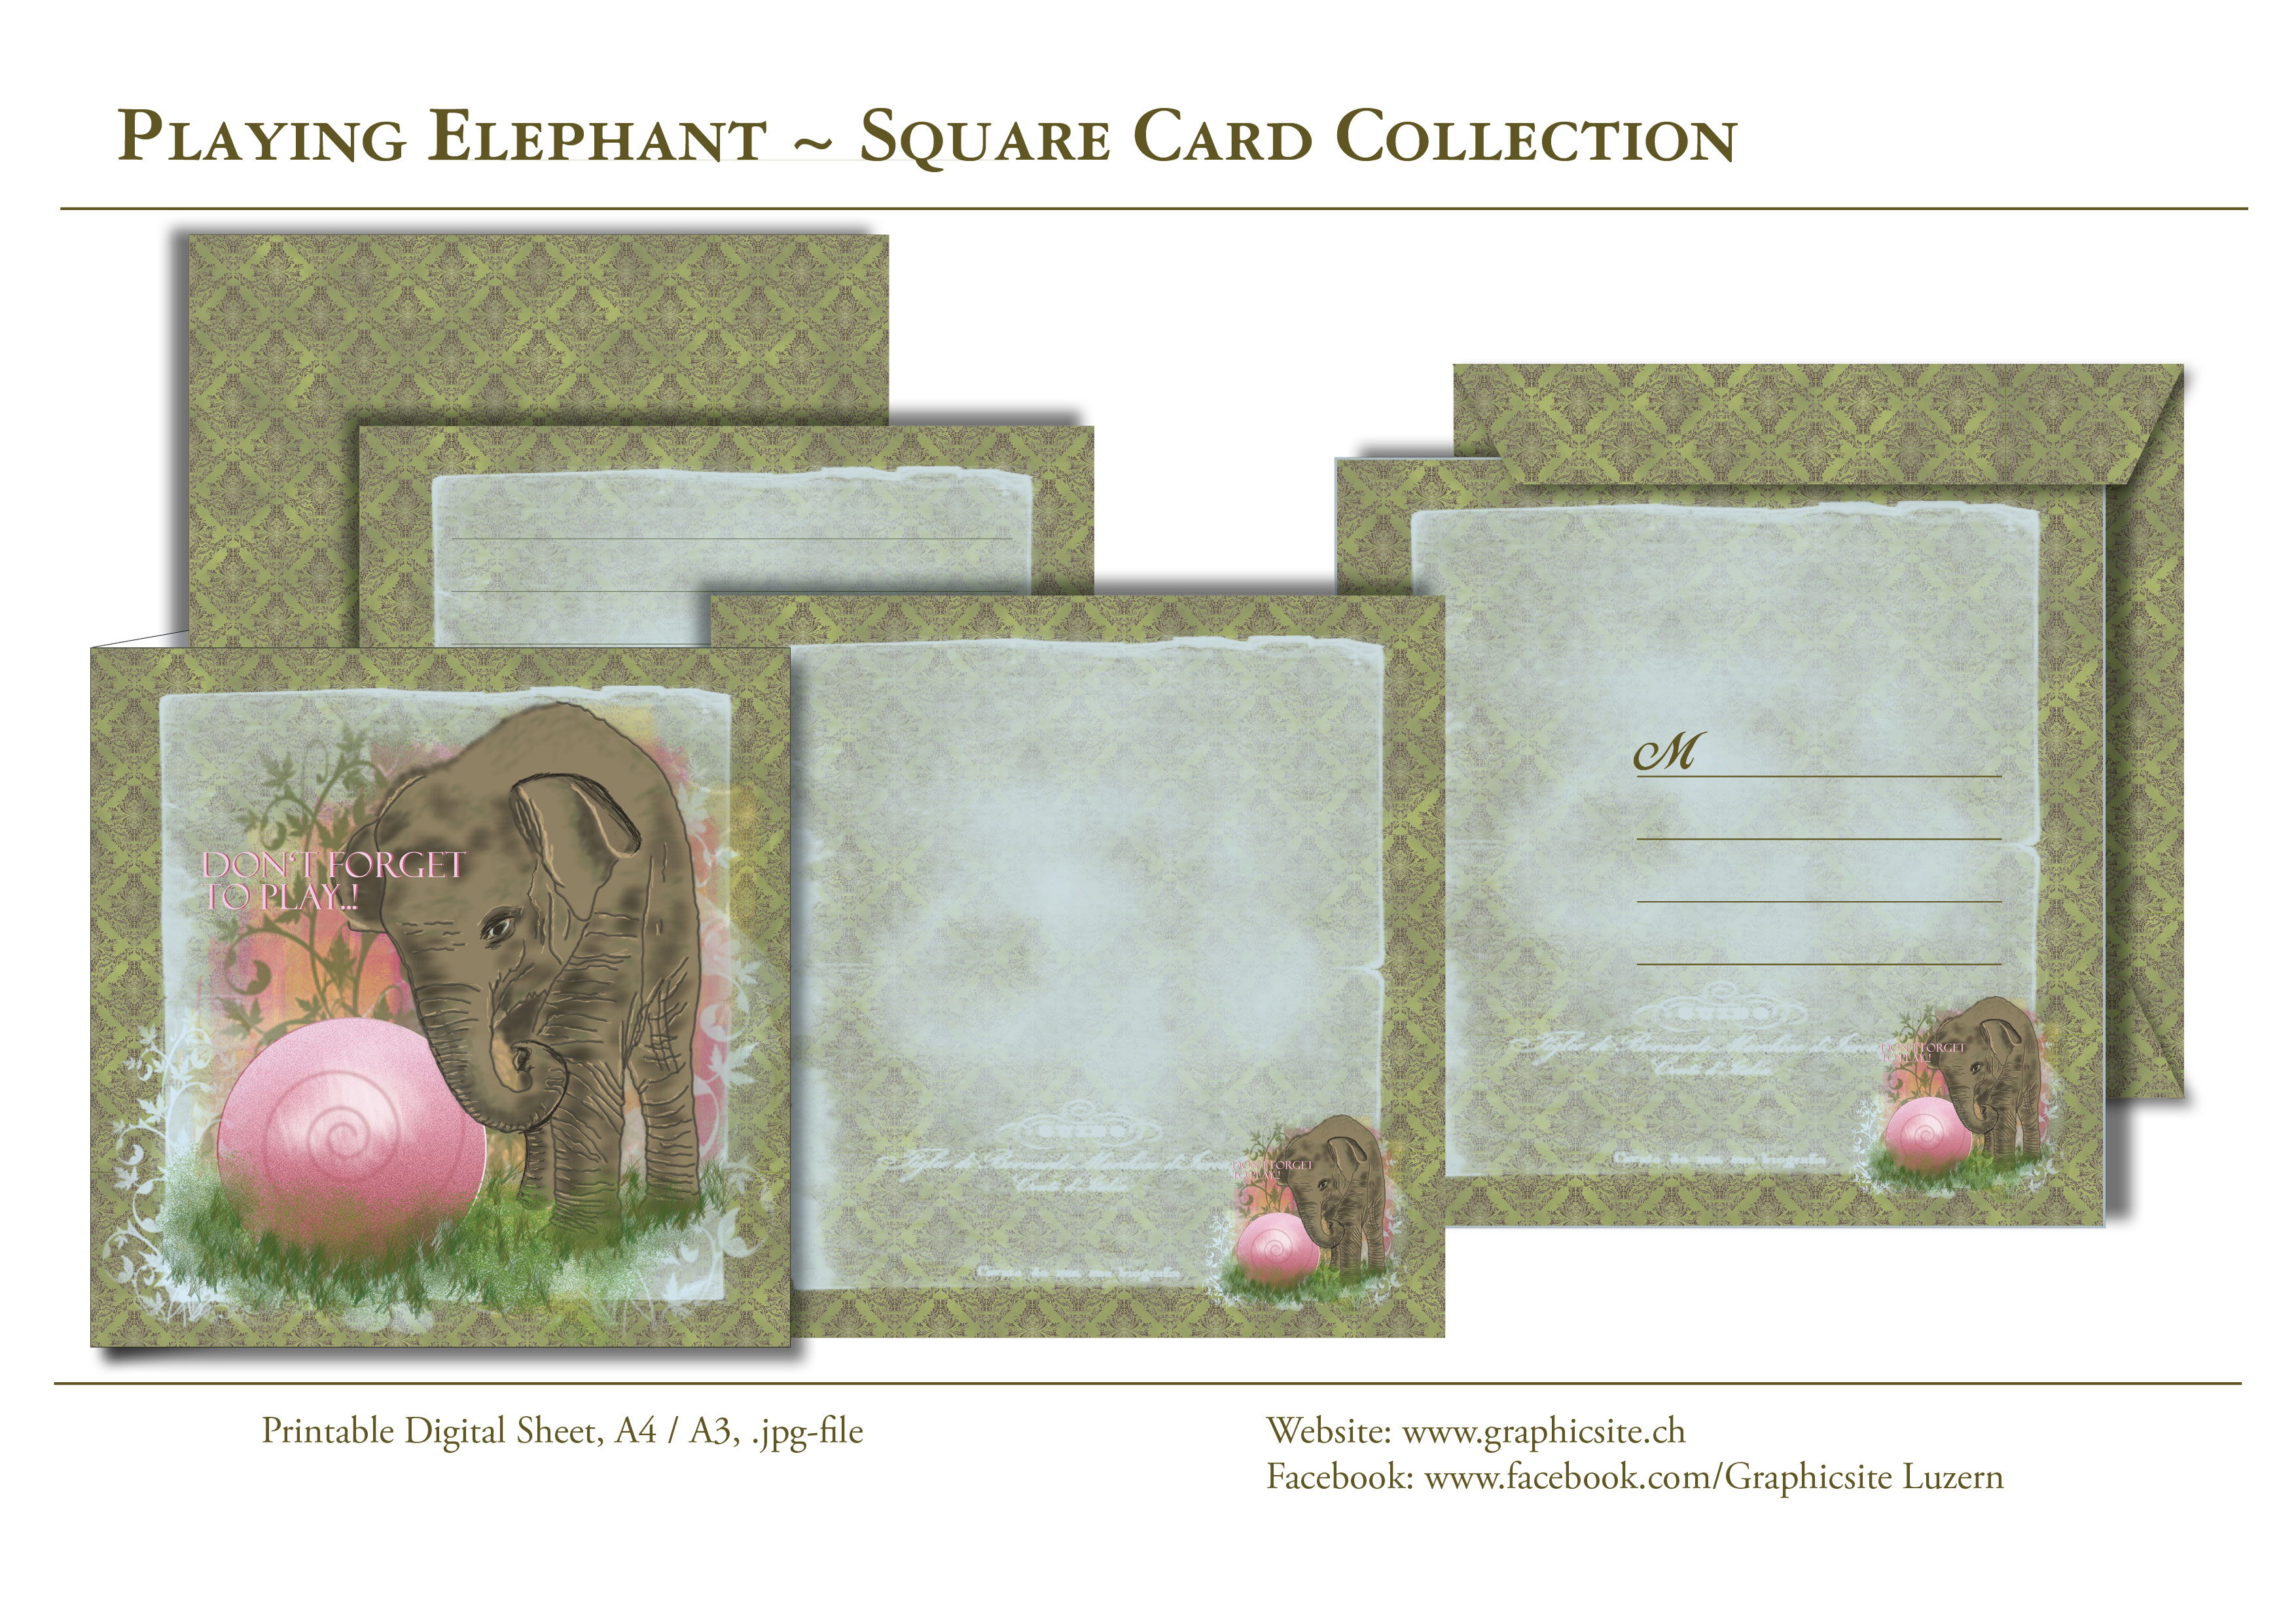 Printable Digital Sheets - Square Card Collection, Animals, Elephant, playing, ball, nature, greeting card, envelope, notecard, blankcard, 